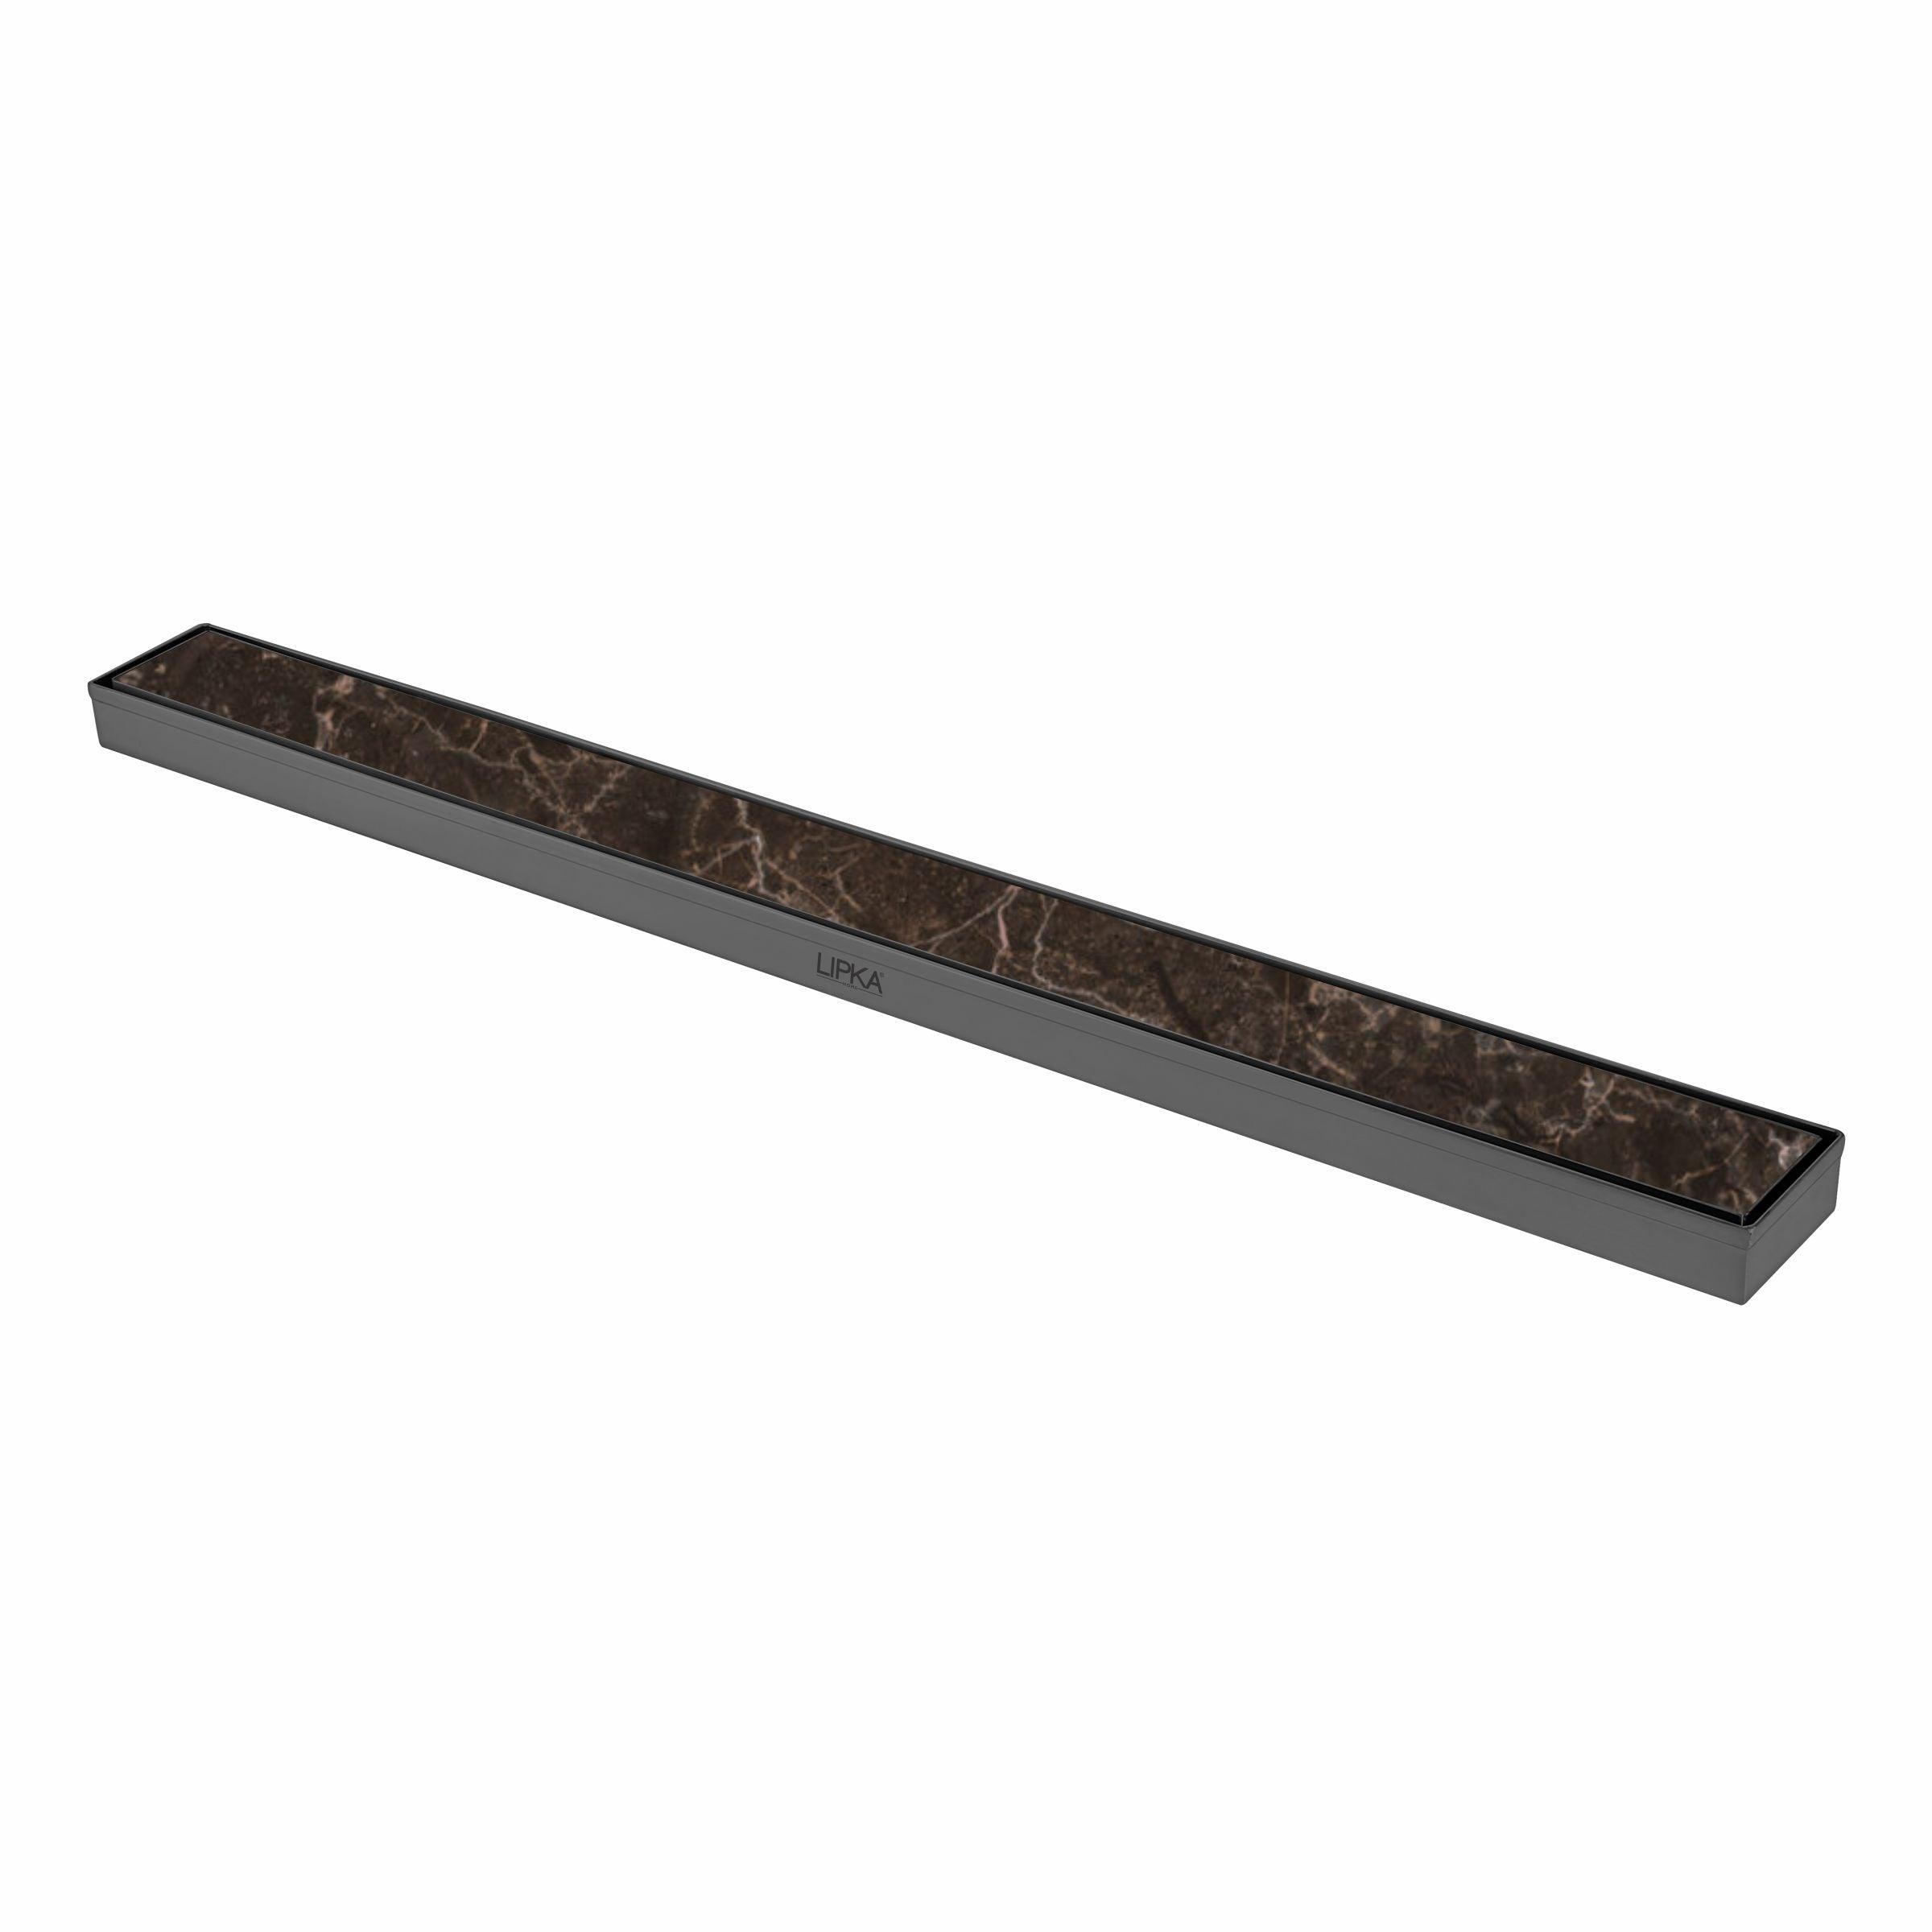 Marble Insert Shower Drain Channel - Black (36 x 2 Inches)